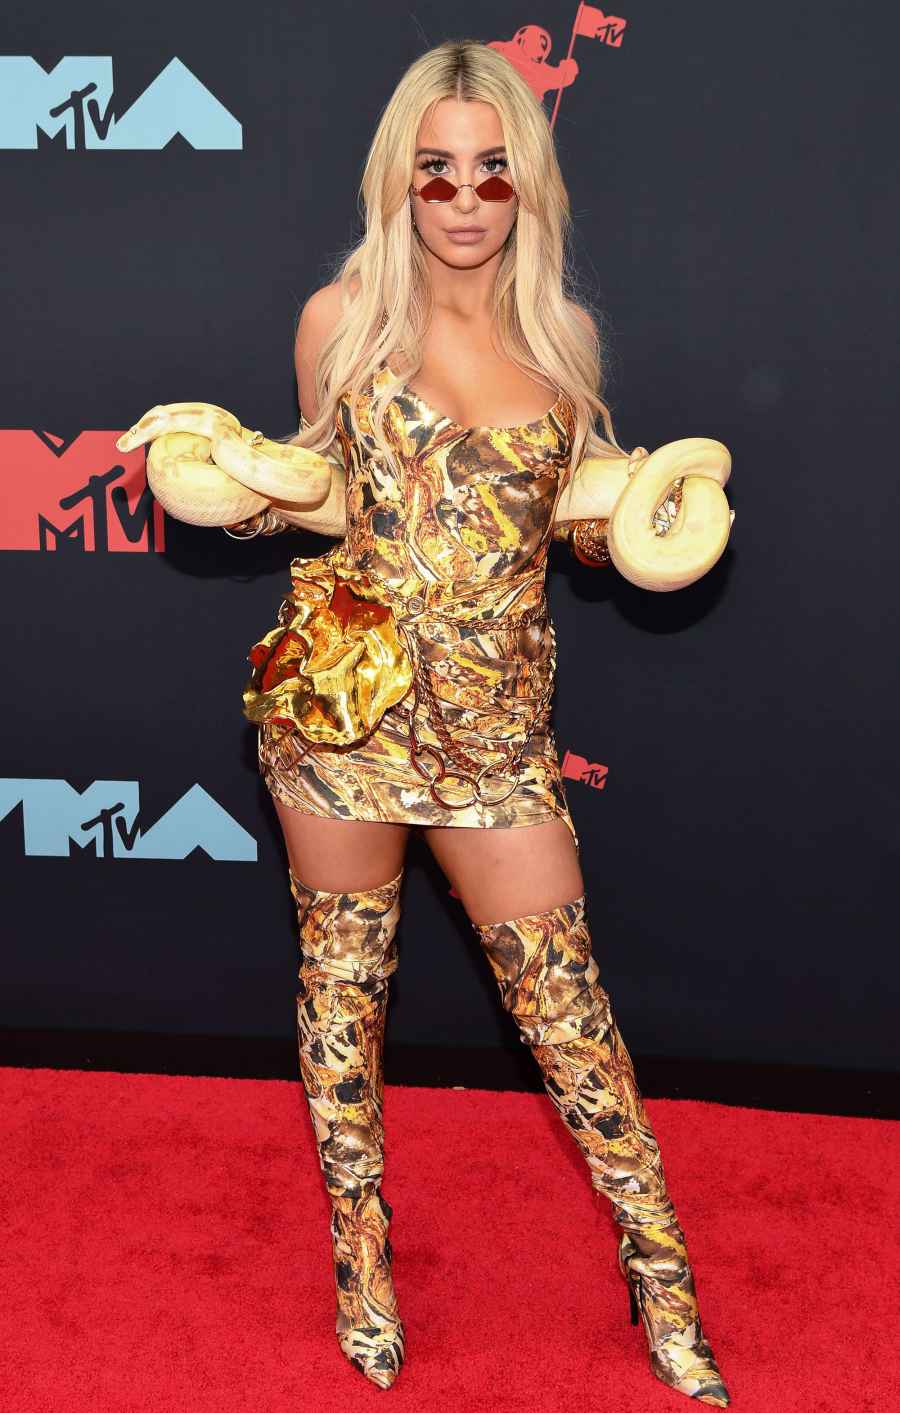 From Snakes to Meat Purses, See the All-Time Craziest VMAs Accessories